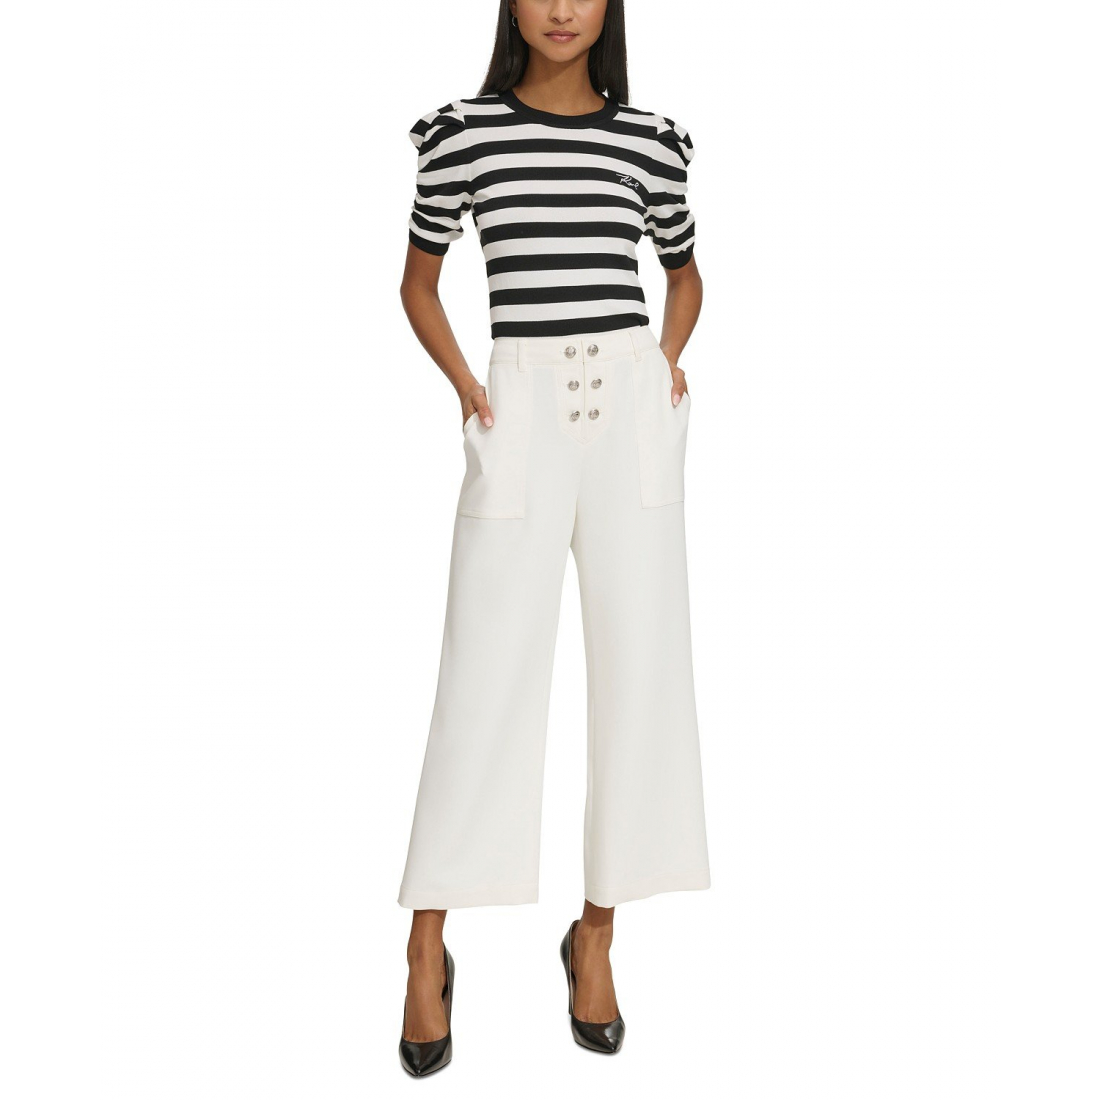 Women's 'Button-Front Ankle' Trousers